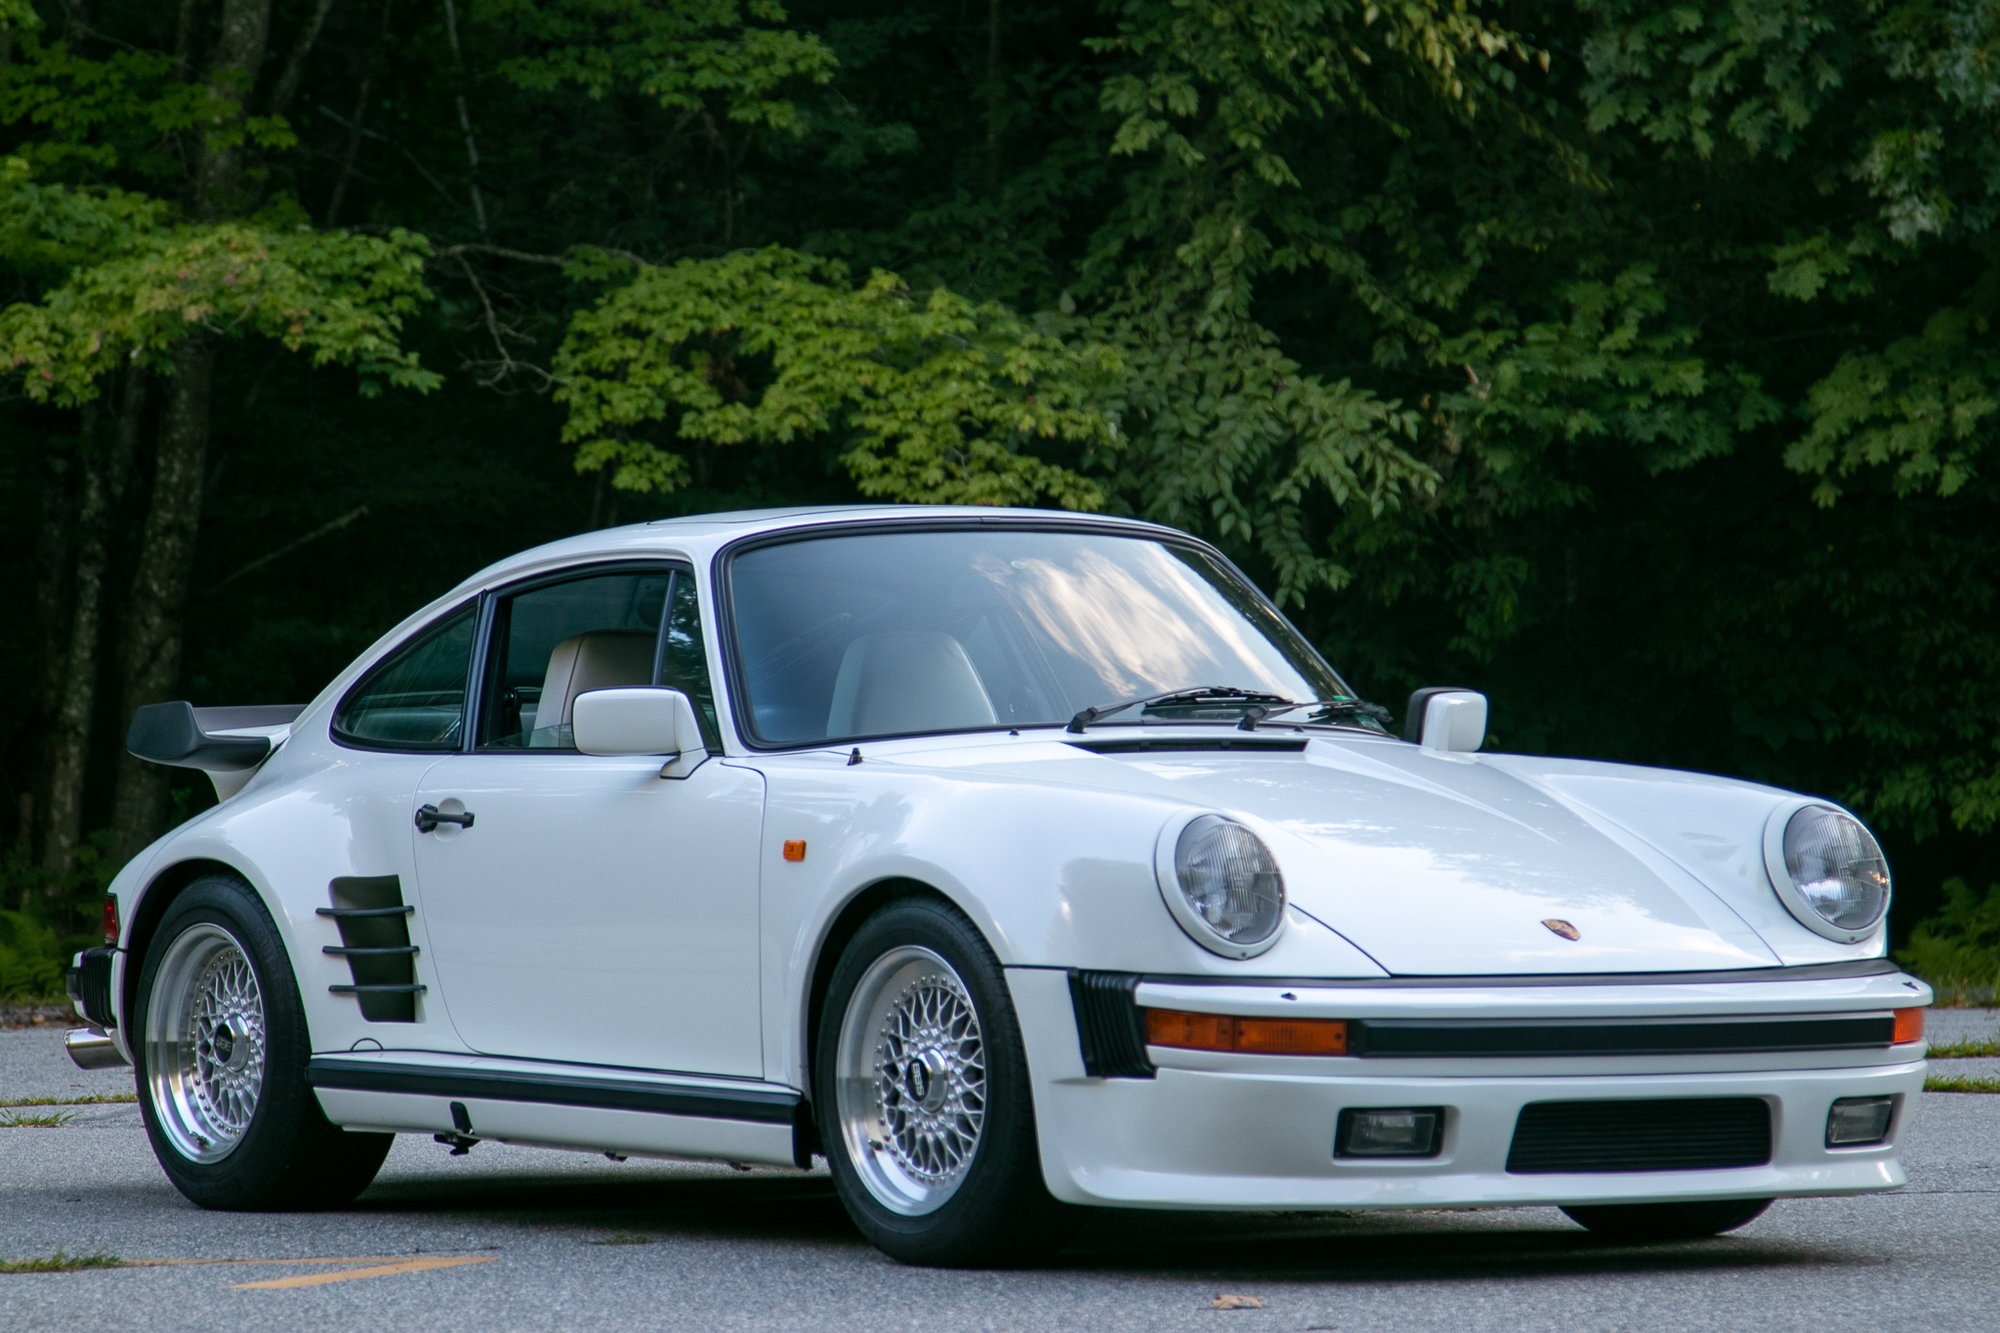 1984 Porsche 911 - 1984 Porsche 911 Turbo "S" Special Wishes Program car - Used - VIN wp0zzz93zes000361 - 28,956 Miles - 6 cyl - 2WD - Manual - Coupe - White - Colchester, CT 06415, United States